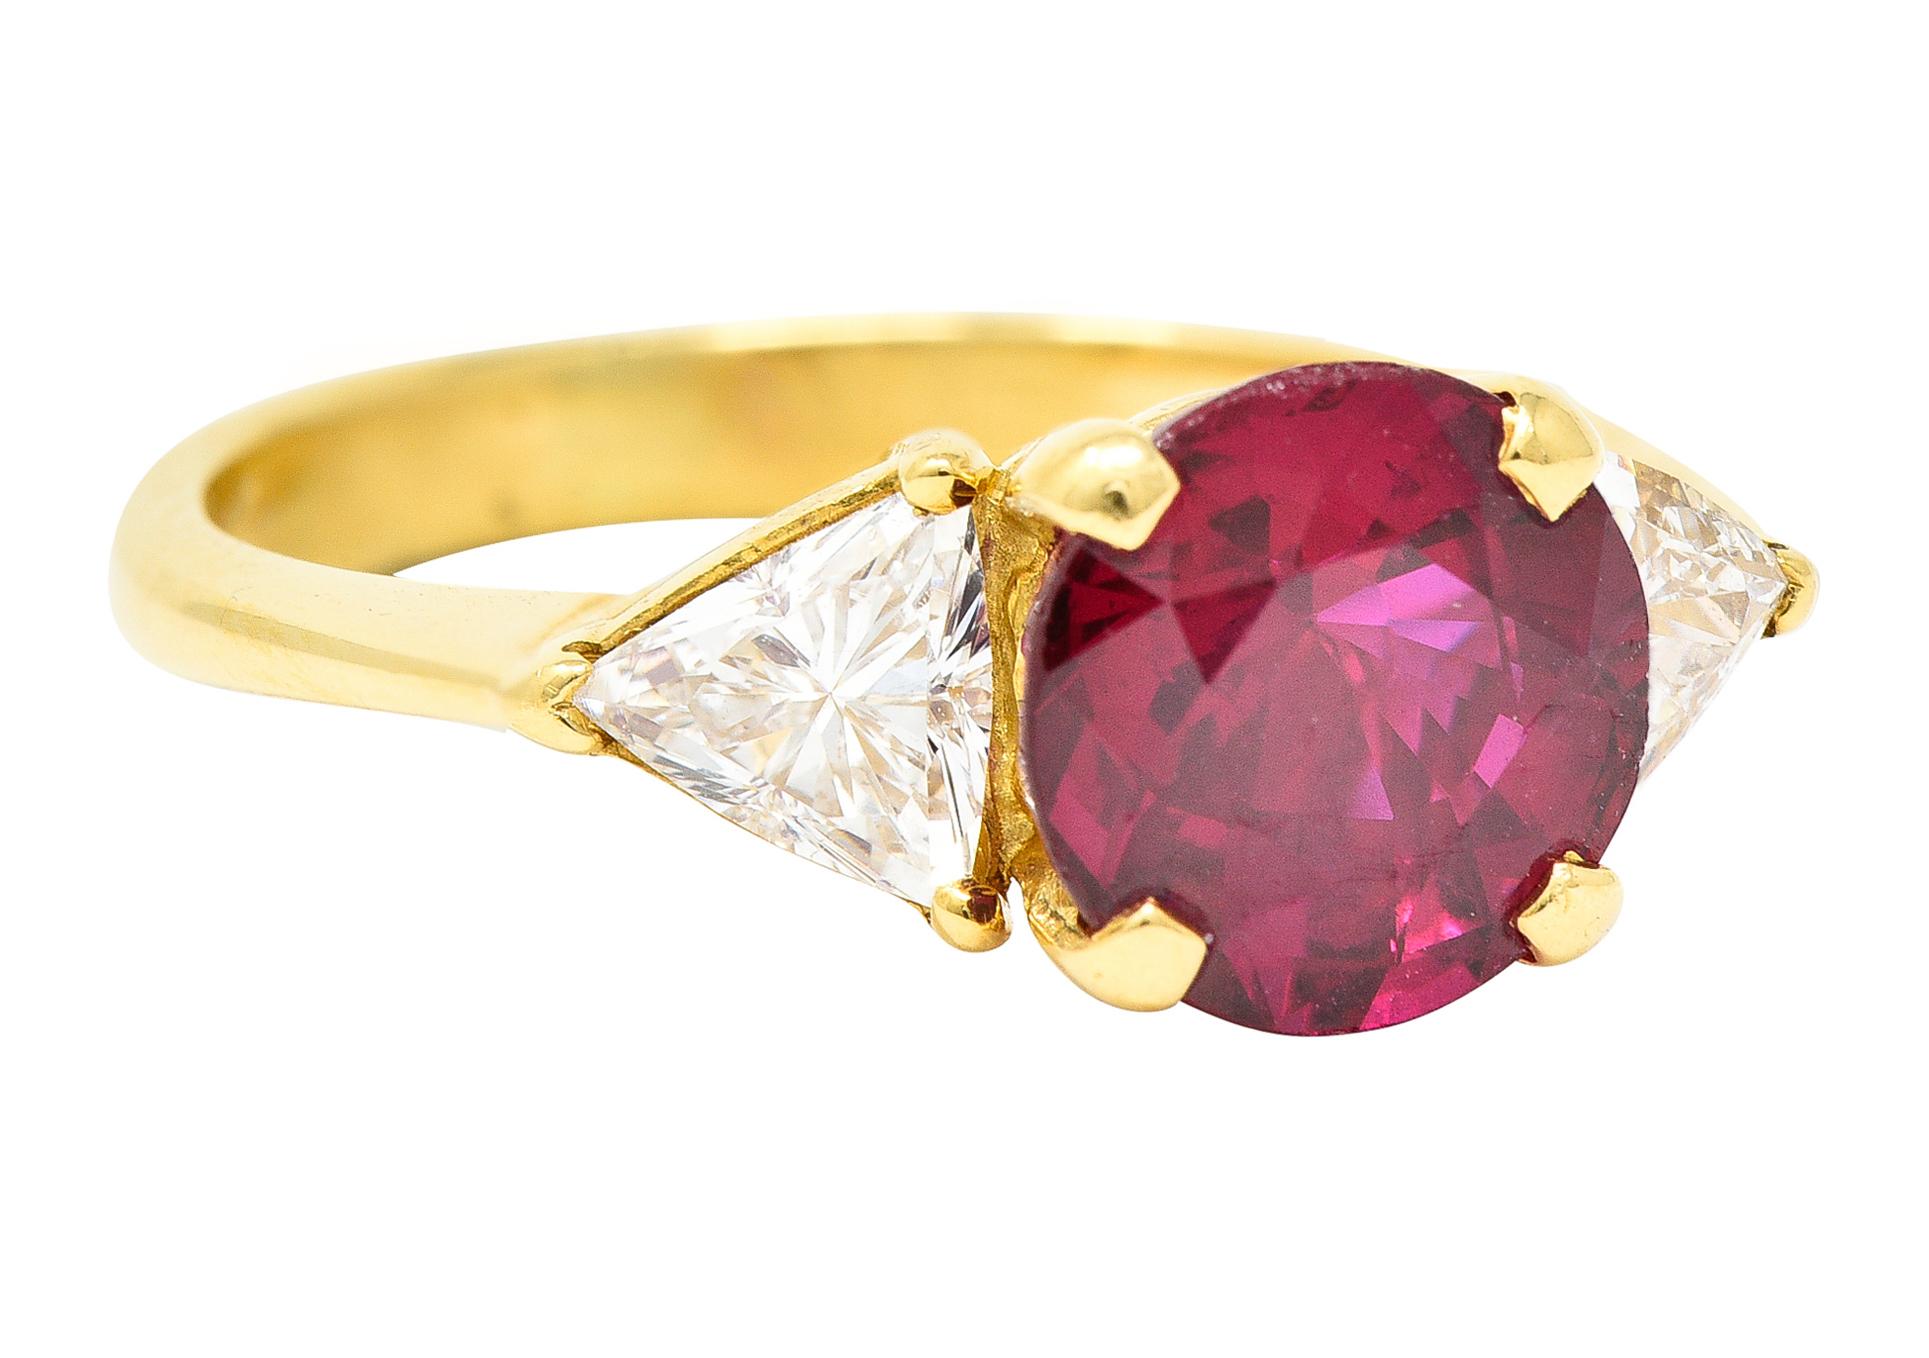 Three stone ring centers a basket set round cut ruby weighing approximately 2.10 carats. Transparent with vivid red color and no indications of heat - Thailand in origin. Flanked by trilliant cut diamonds weighing collectively approximately 0.68